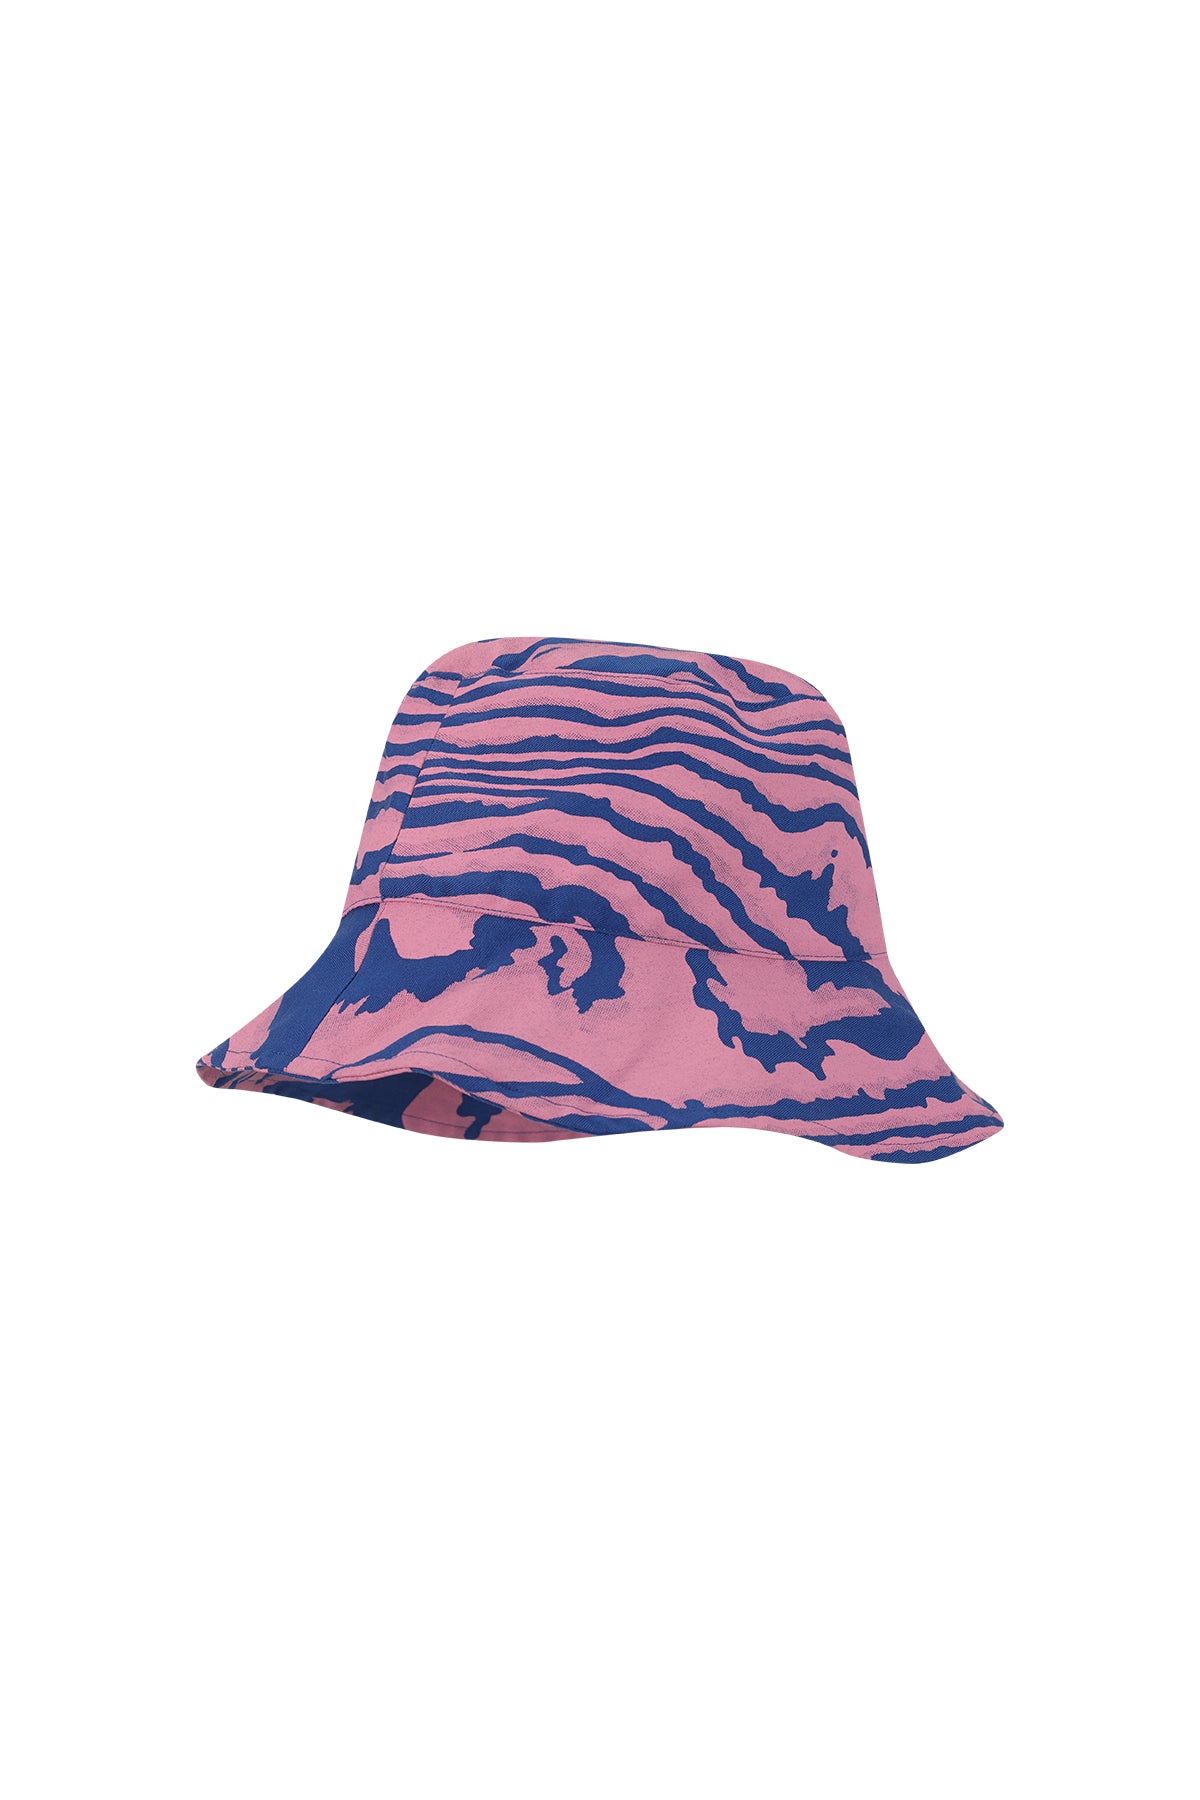 BLUE AND PINK BUCKET HAT MA KIDS